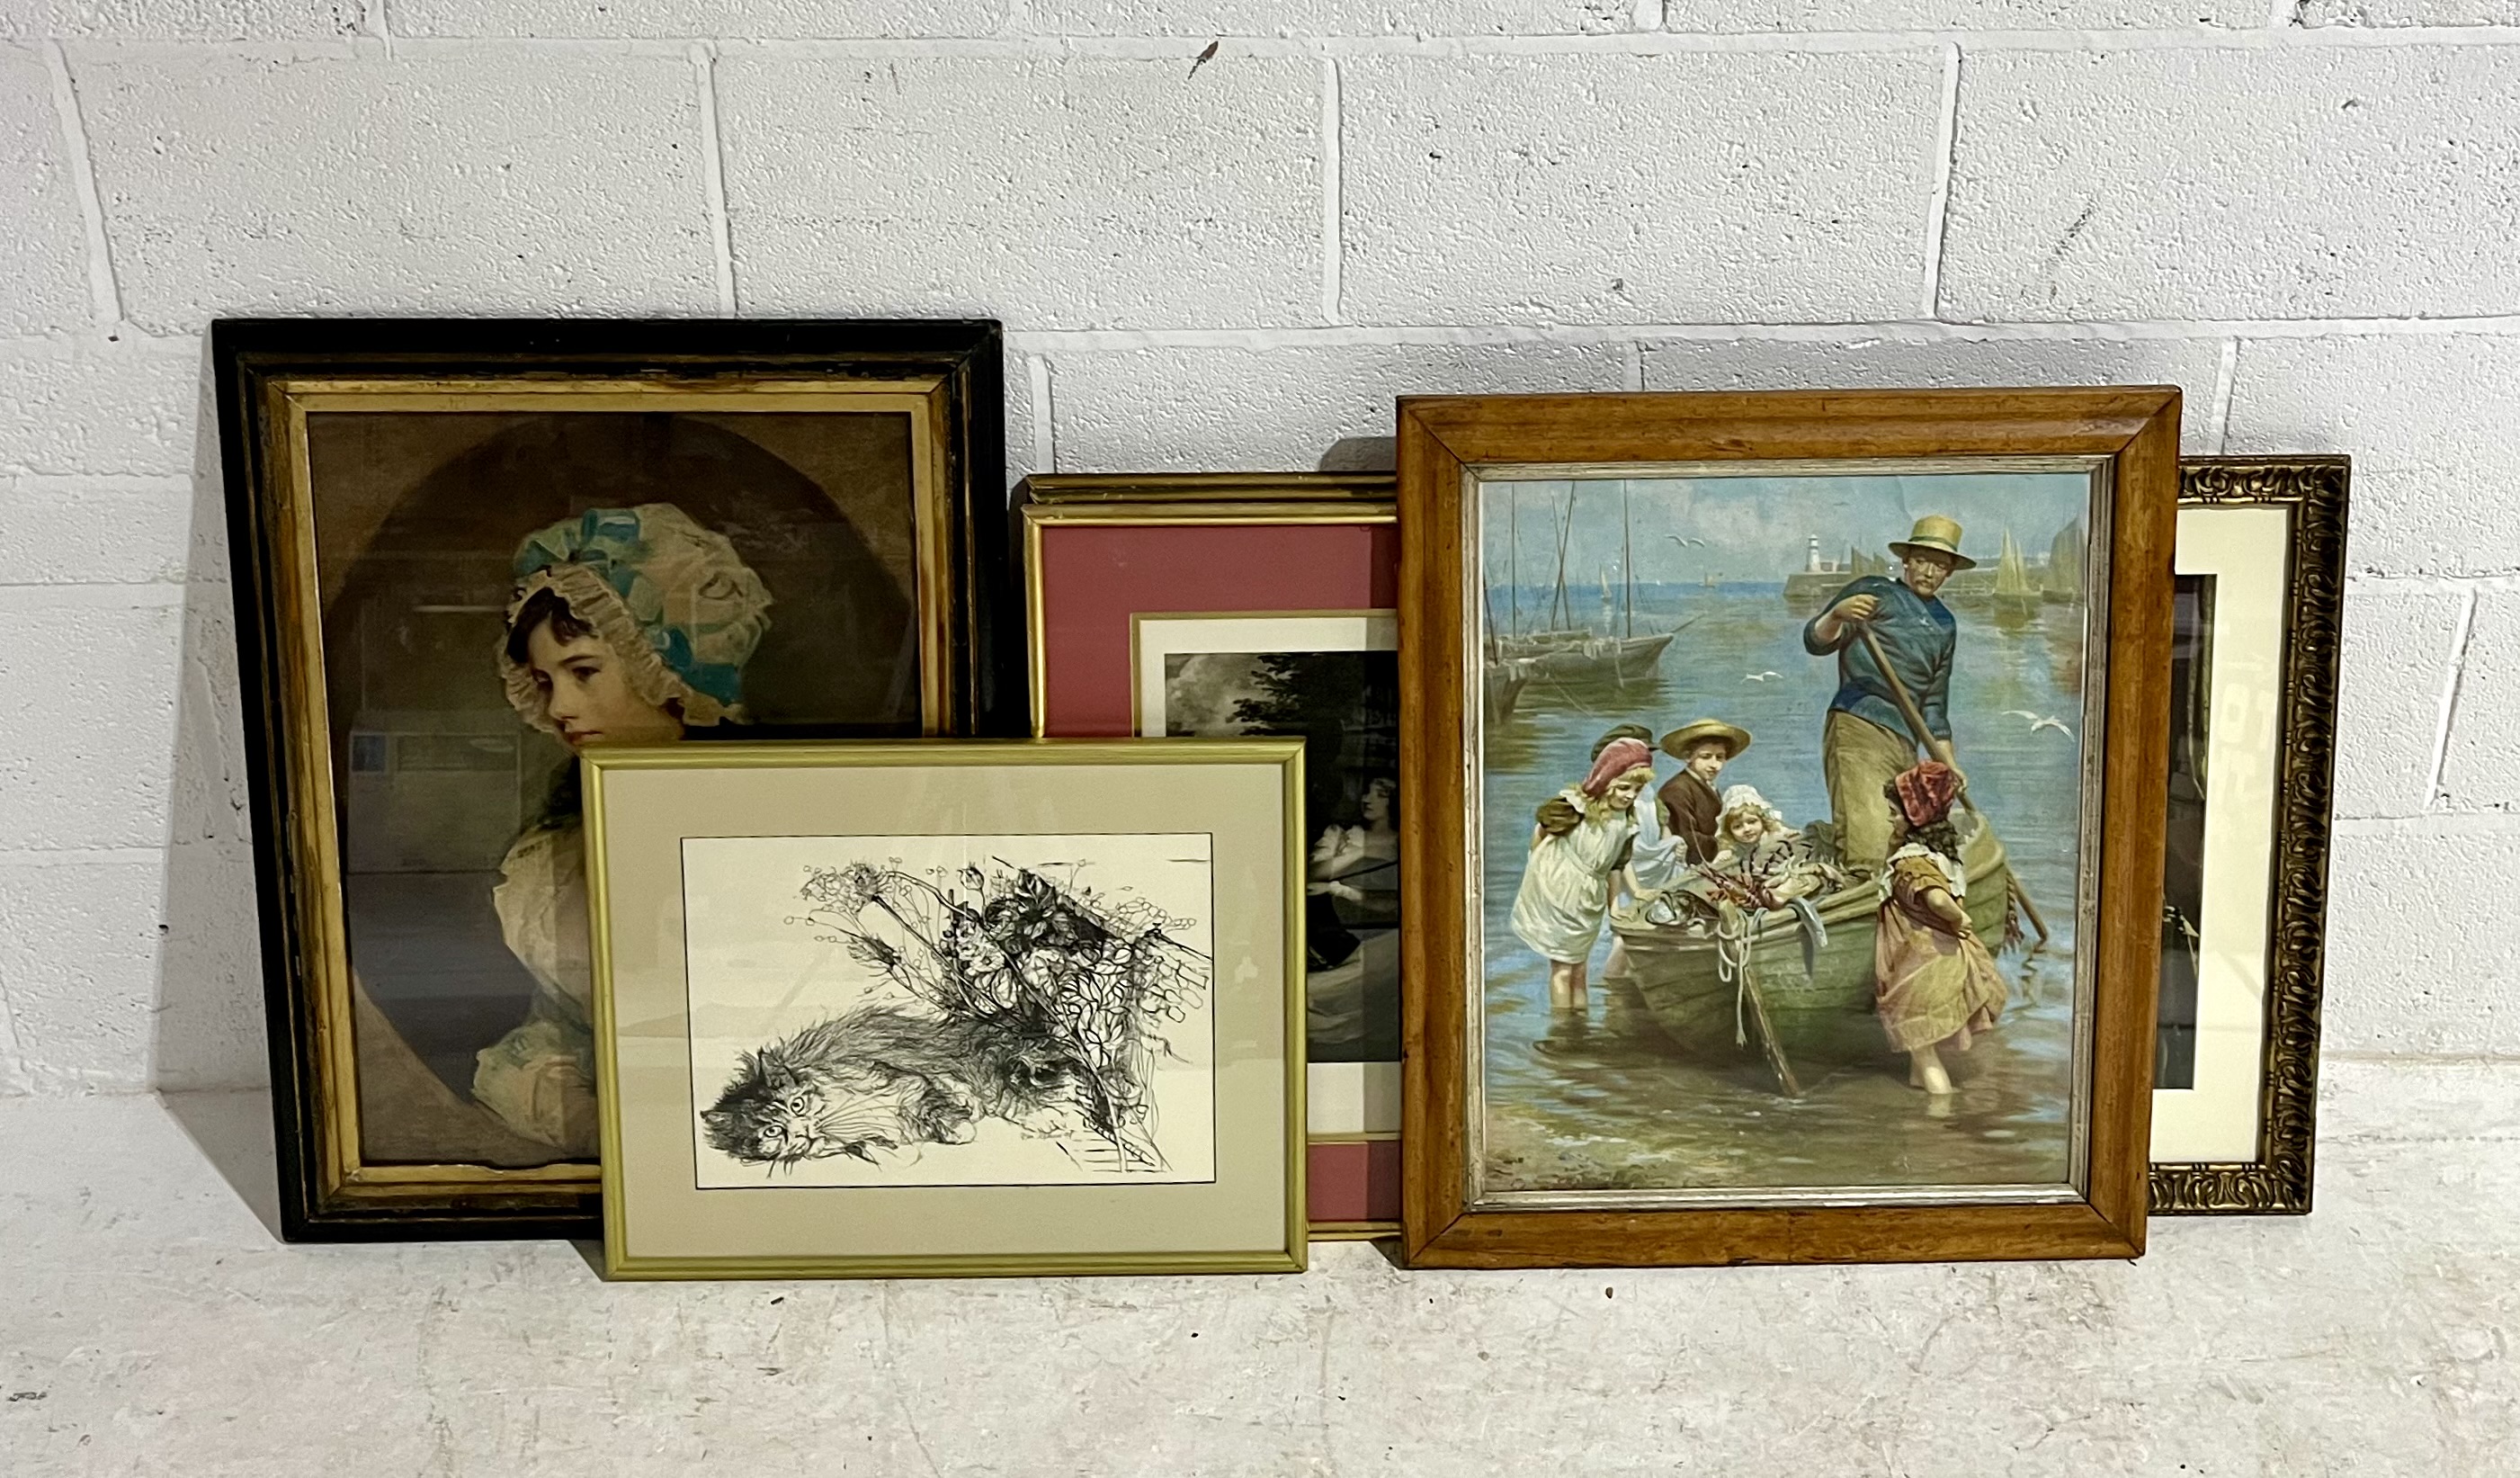 A collection of framed antique prints including "Monsters of the Deep" and "Mrs Williams" by John